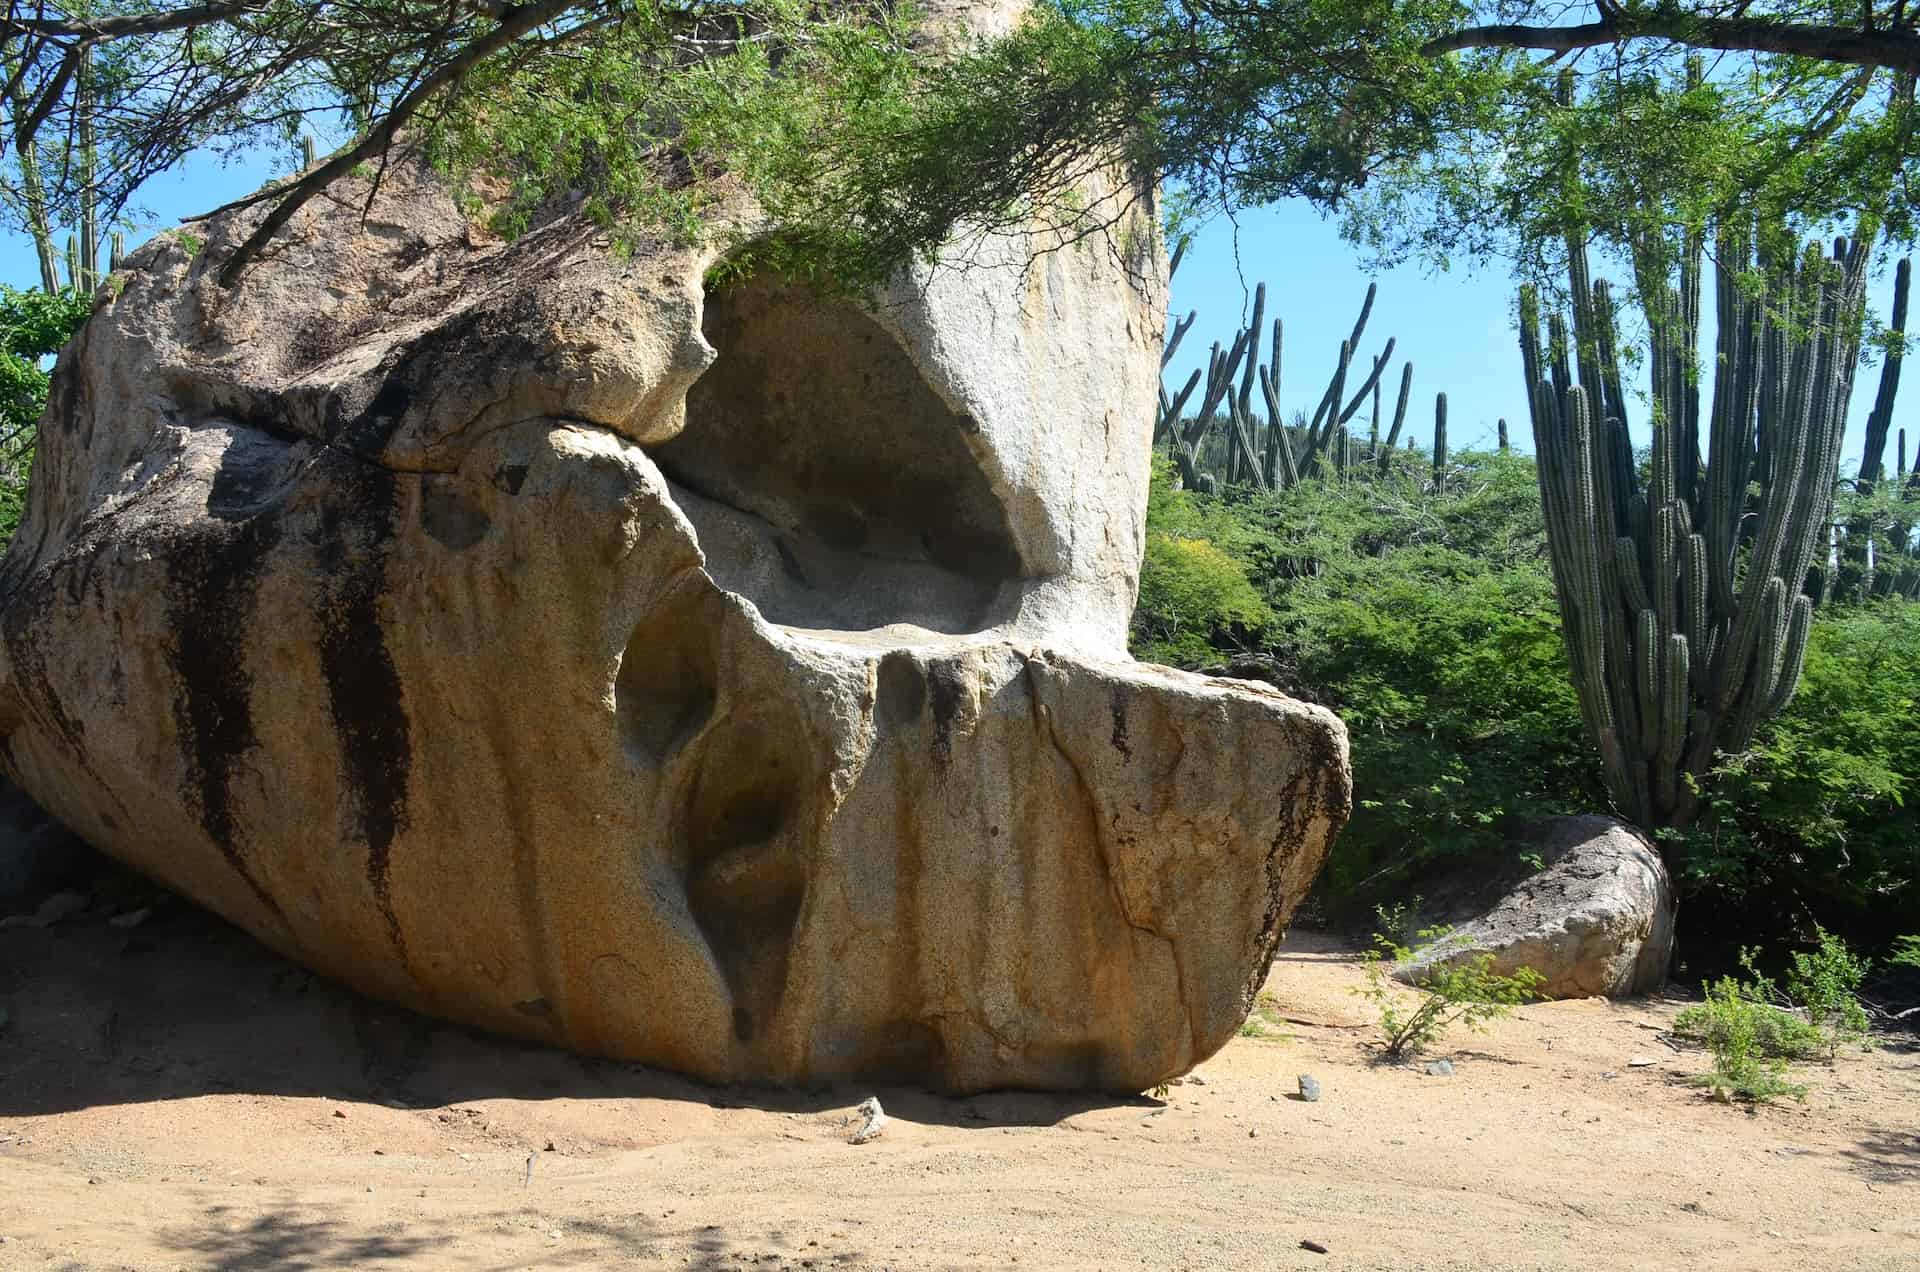 Large rock at the Ayo Rock Formations